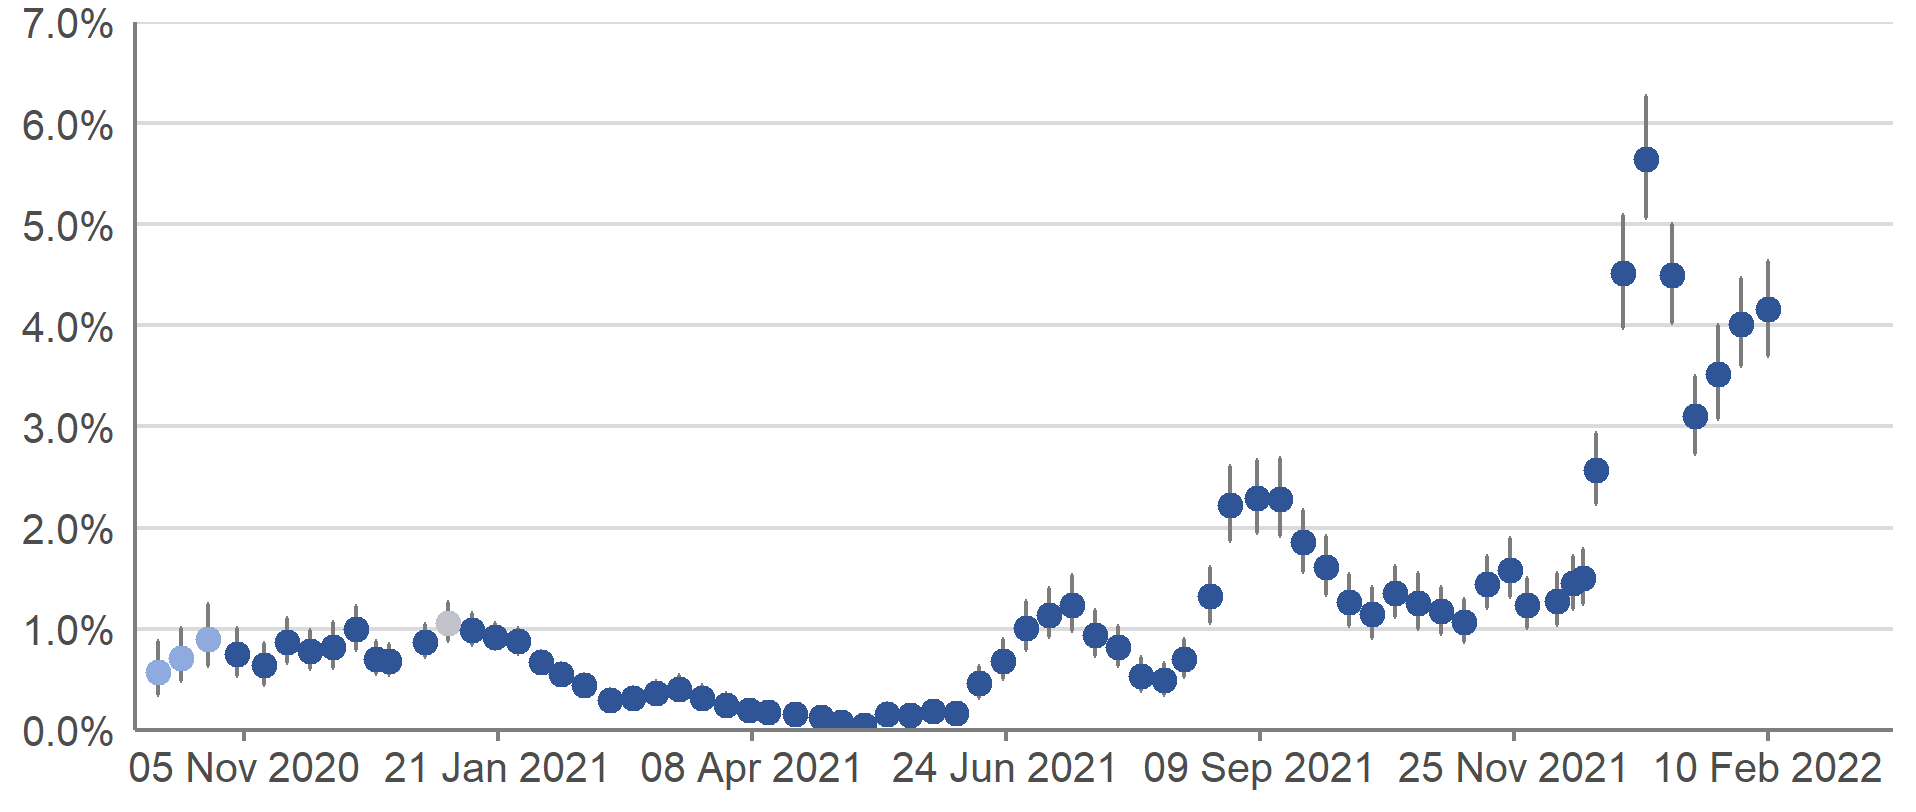 The estimated percentage of people testing positive for COVID-19 reached the greatest peak since the start of the pandemic in the week 1 to 7 January 2022, after three weeks of rapid increase. After a period of decrease, the estimates increased in the two weeks up to 13 February 2022, but the trend was uncertain in the most recent week.